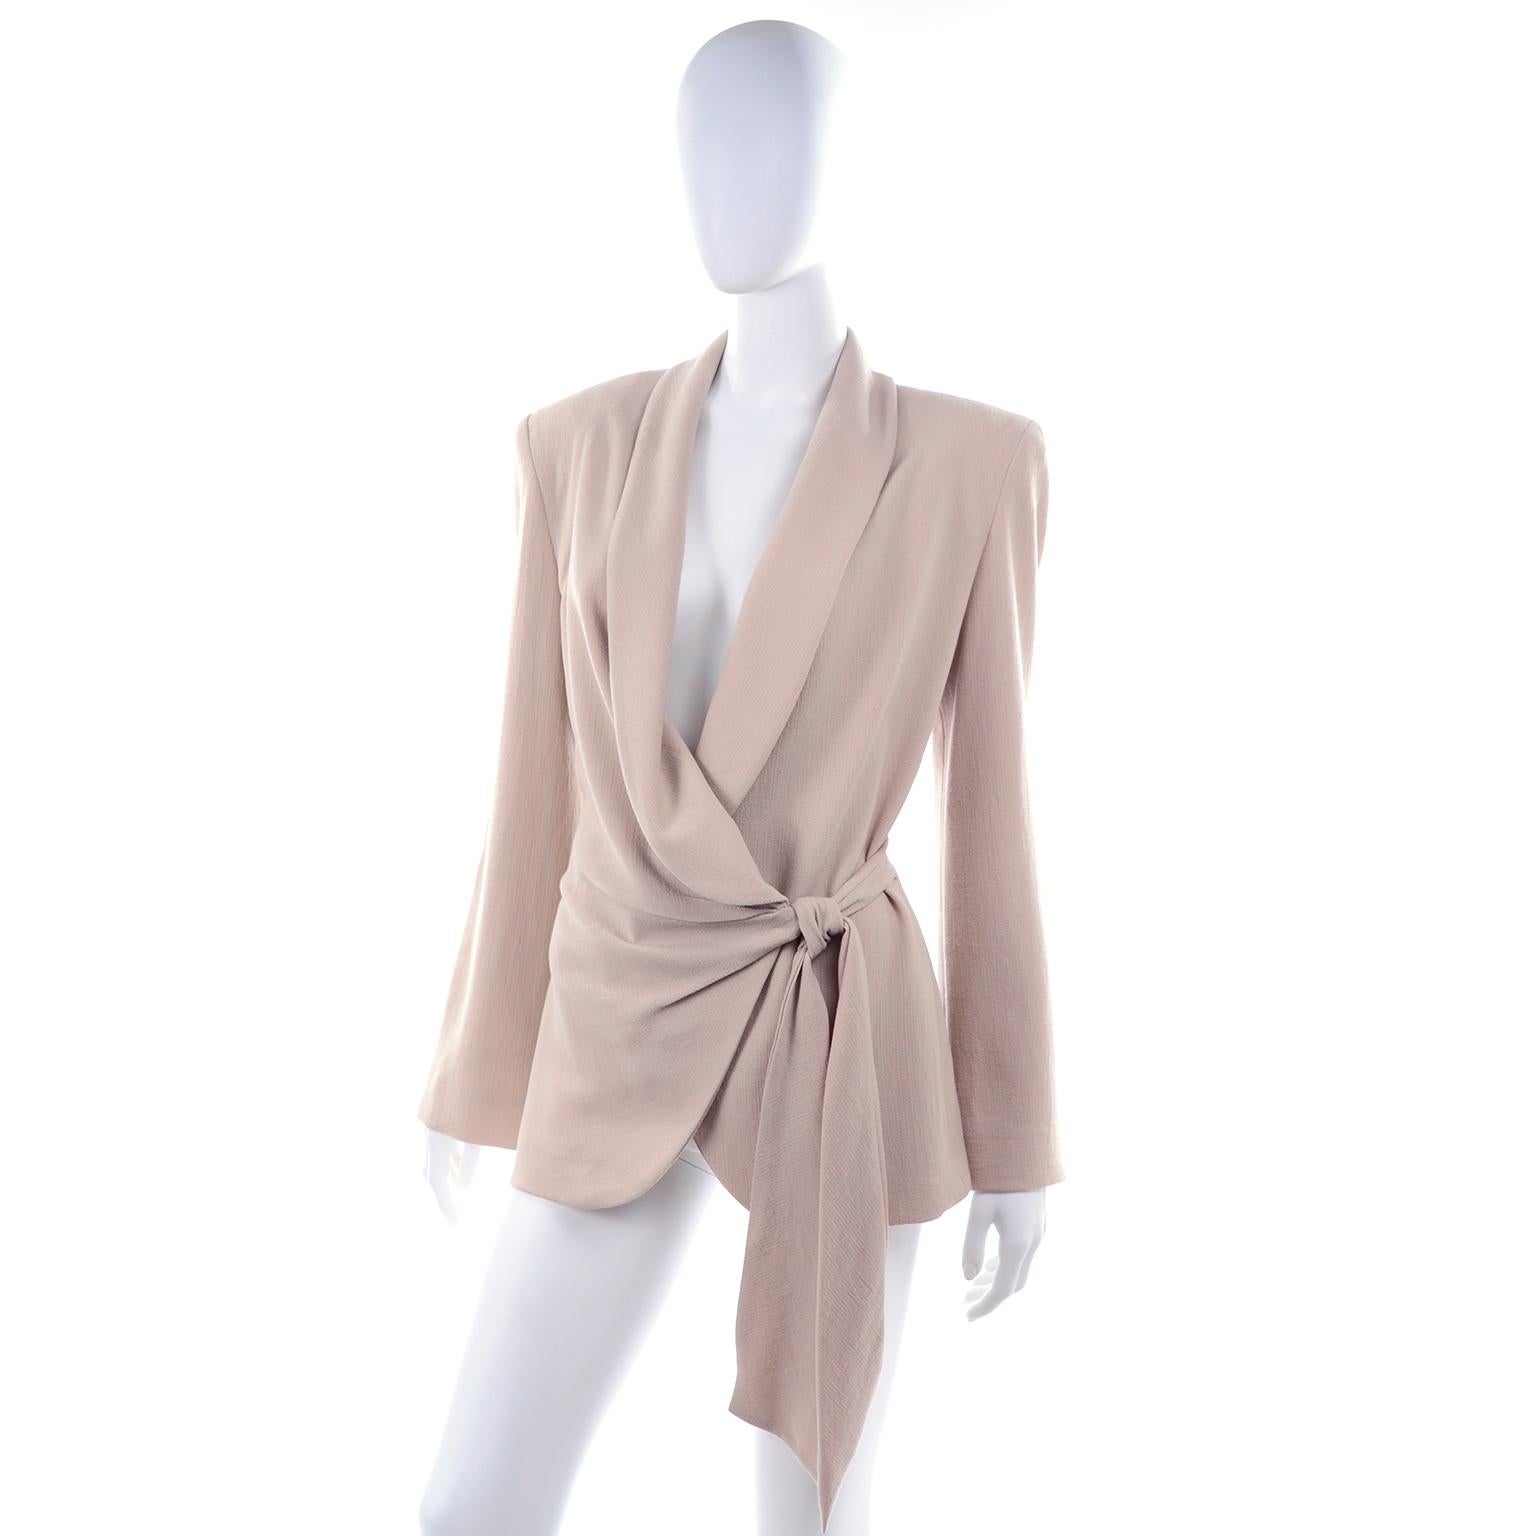 This is a deadstock Donna Karan 1990's vintage tan / beige wool blazer that ties in the front with an attached sash.  The jacket closes with a single button on the inside, giving it a wrap effect.  We love the way it is draped so beautifully and the